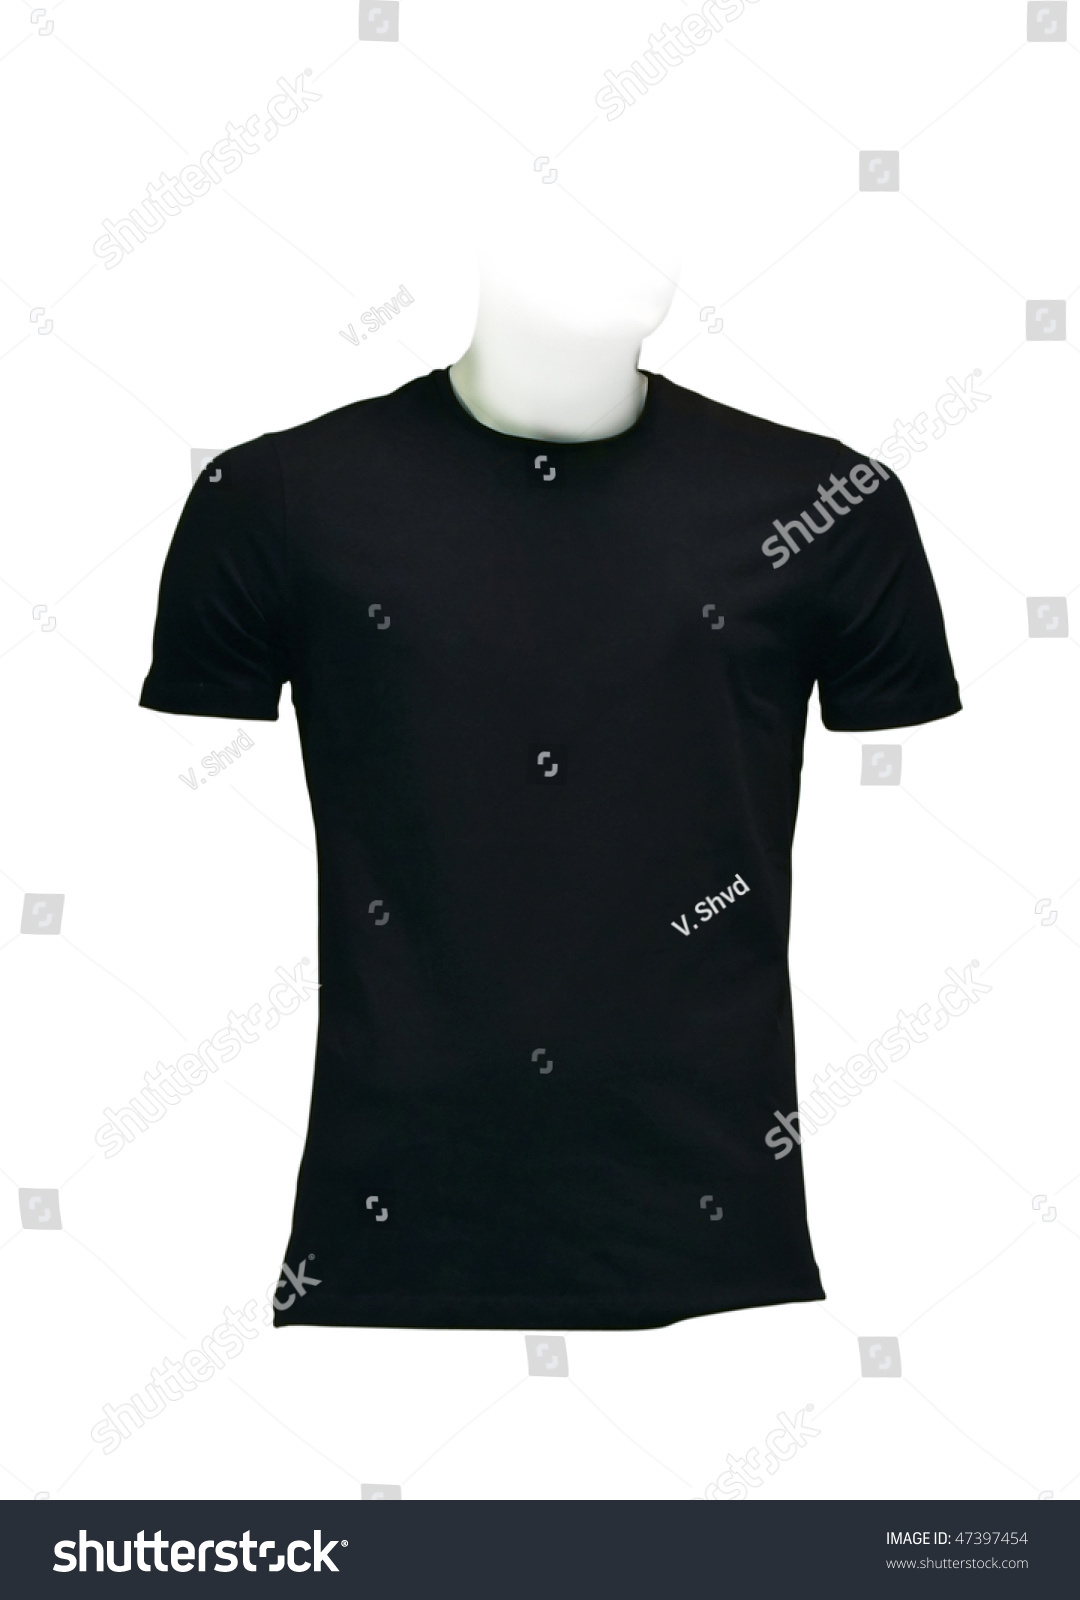 Men'S Black T-Shirt. Photo With Clipping Path. - 47397454 : Shutterstock